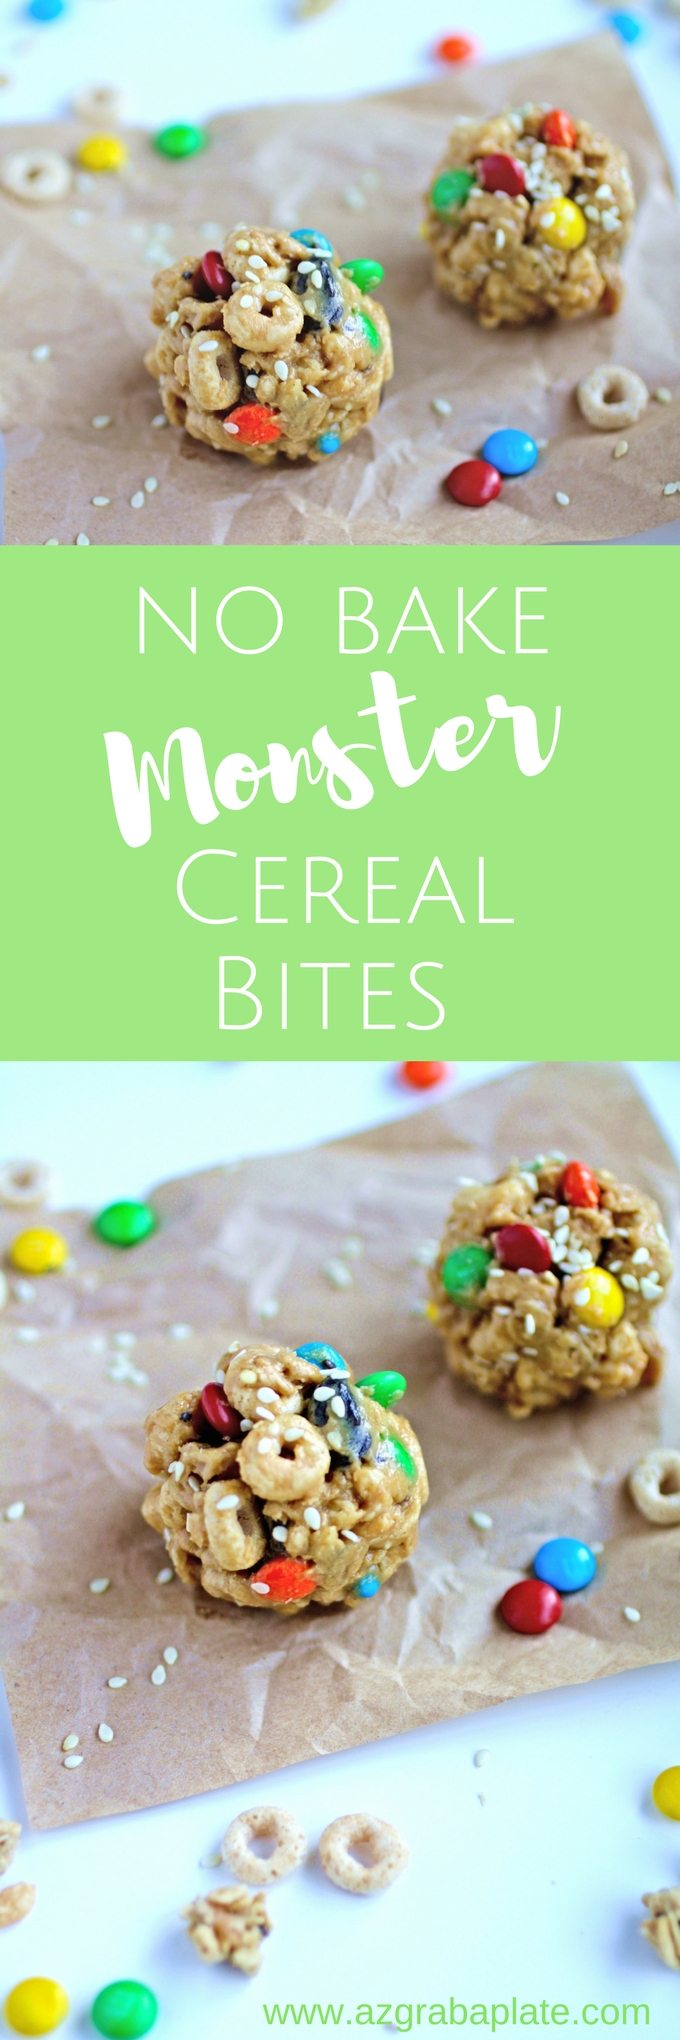 No-Bake Monster Cereal Bites are such a fun treat! You might even have all the ingredients on hand - what a fun snack!